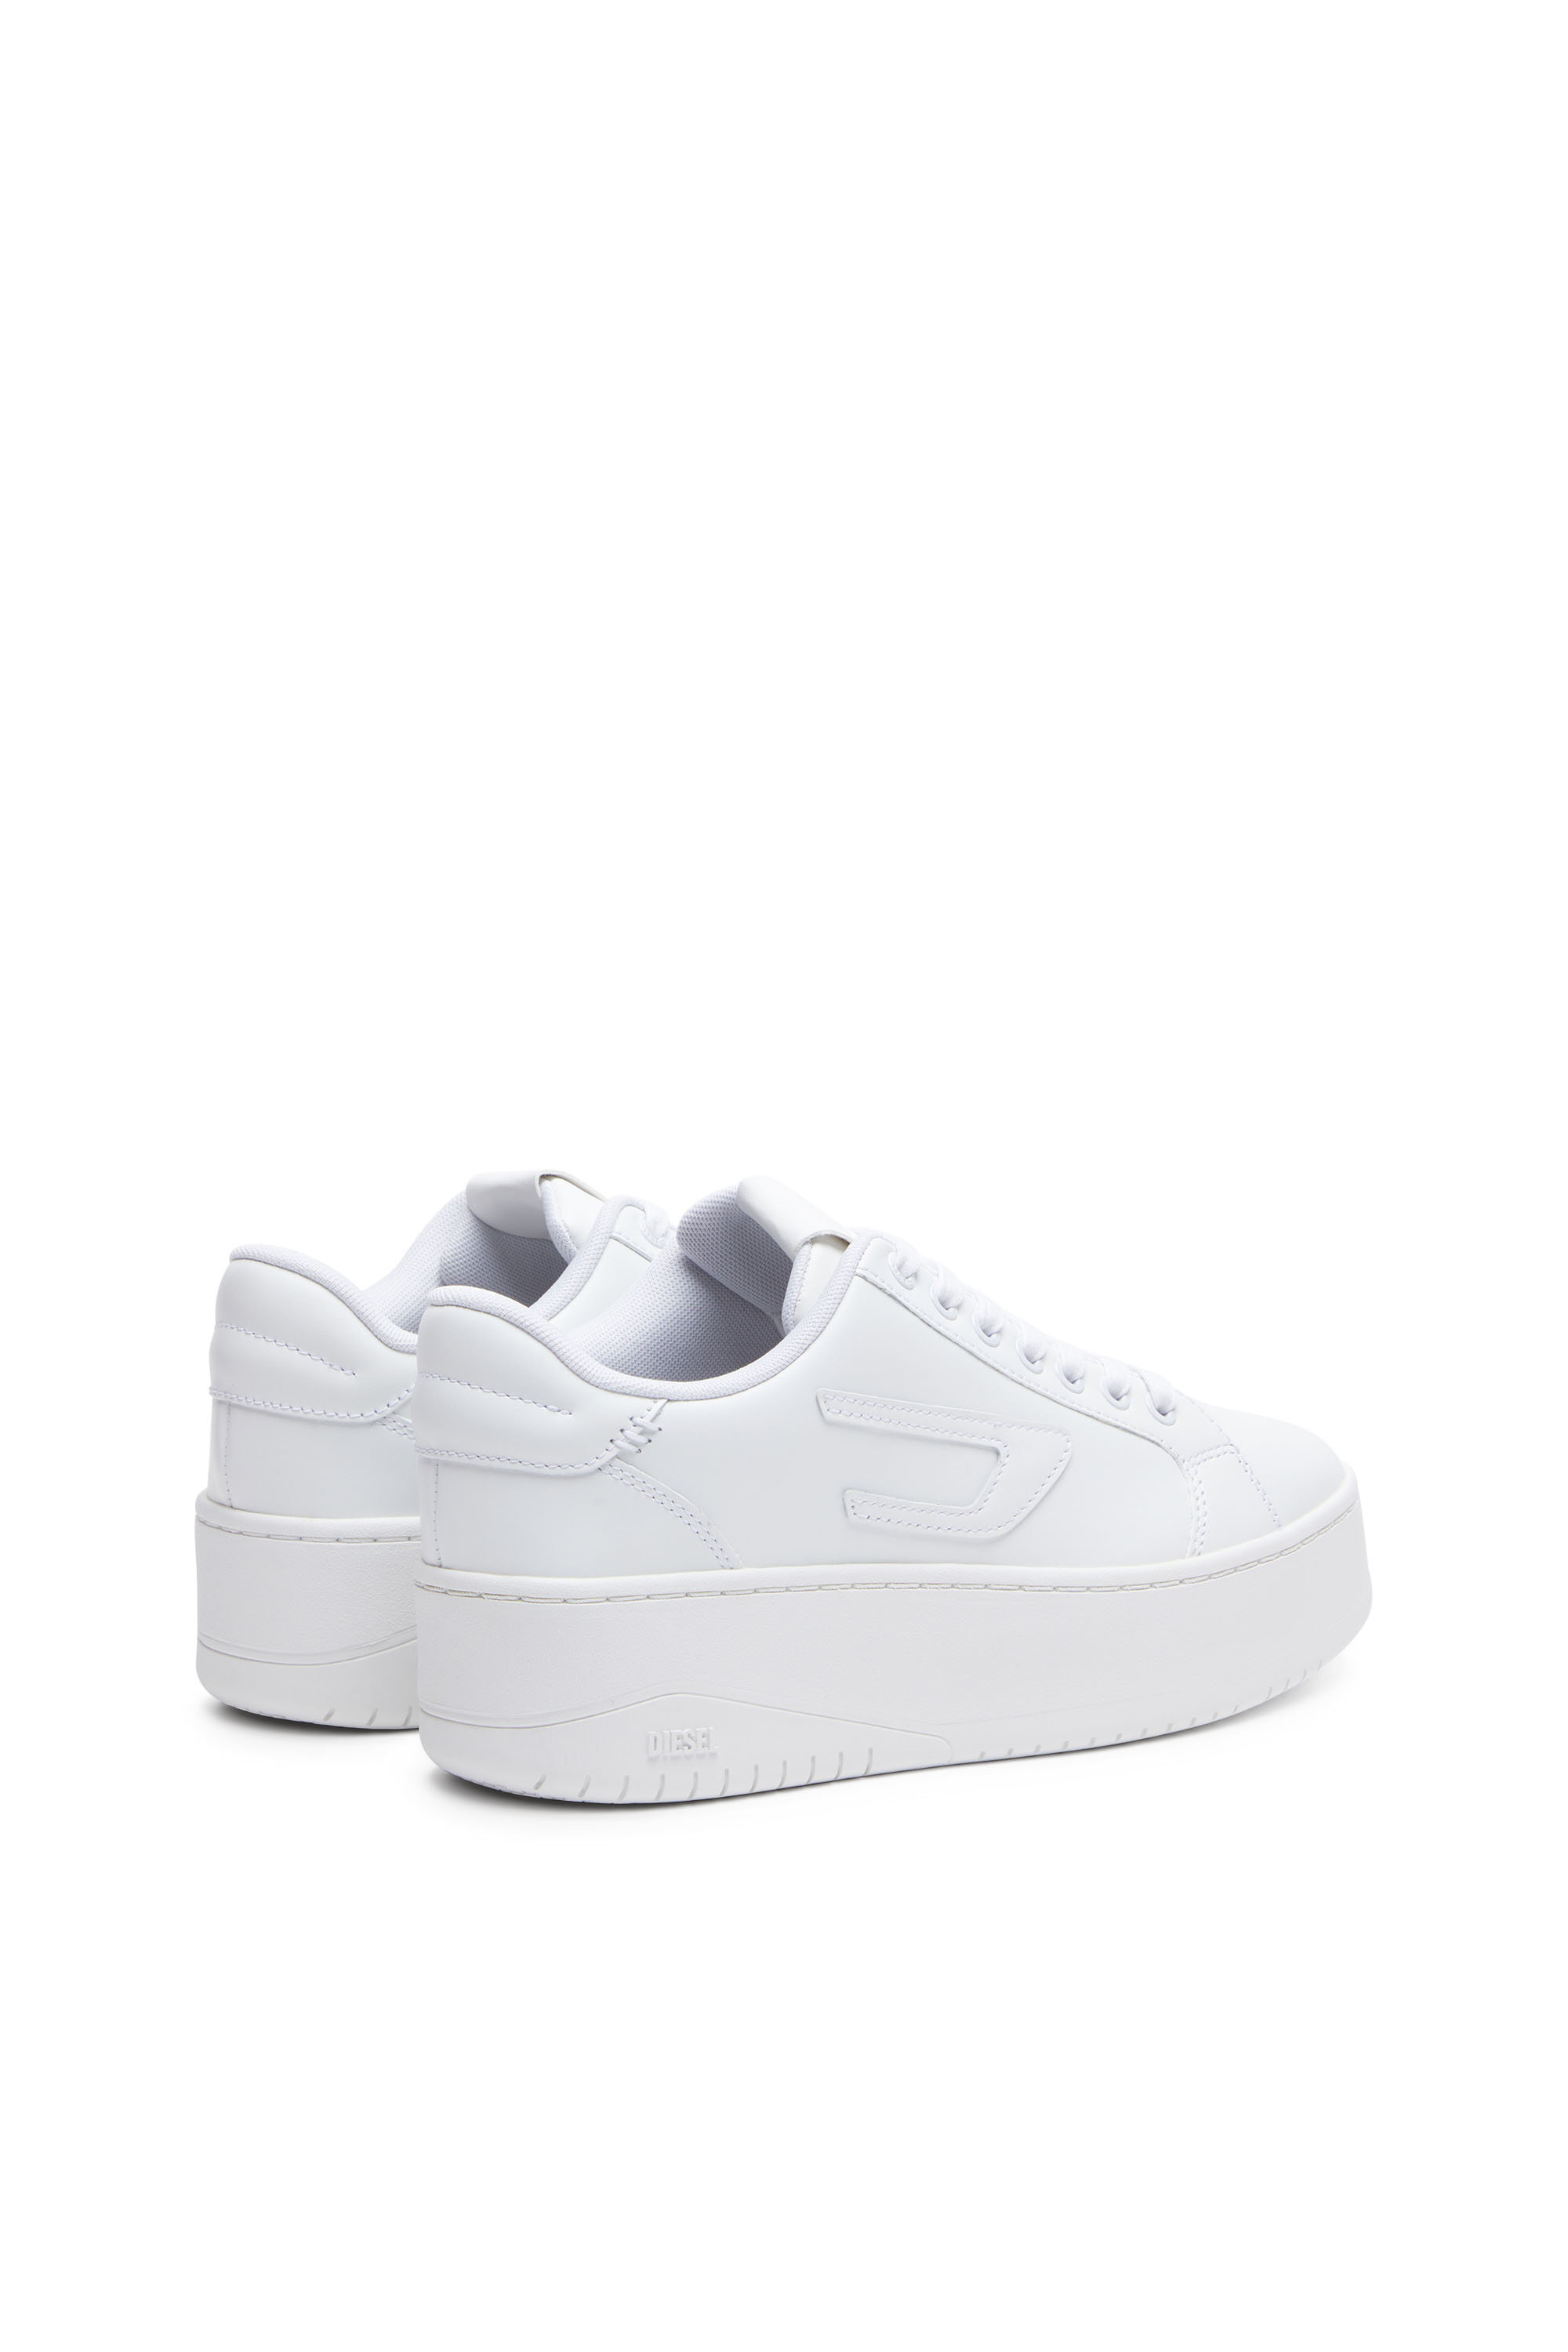 Diesel - S-ATHENE BOLD X, Female S-Athene Bold-Flatform sneakers in leather in White - Image 3